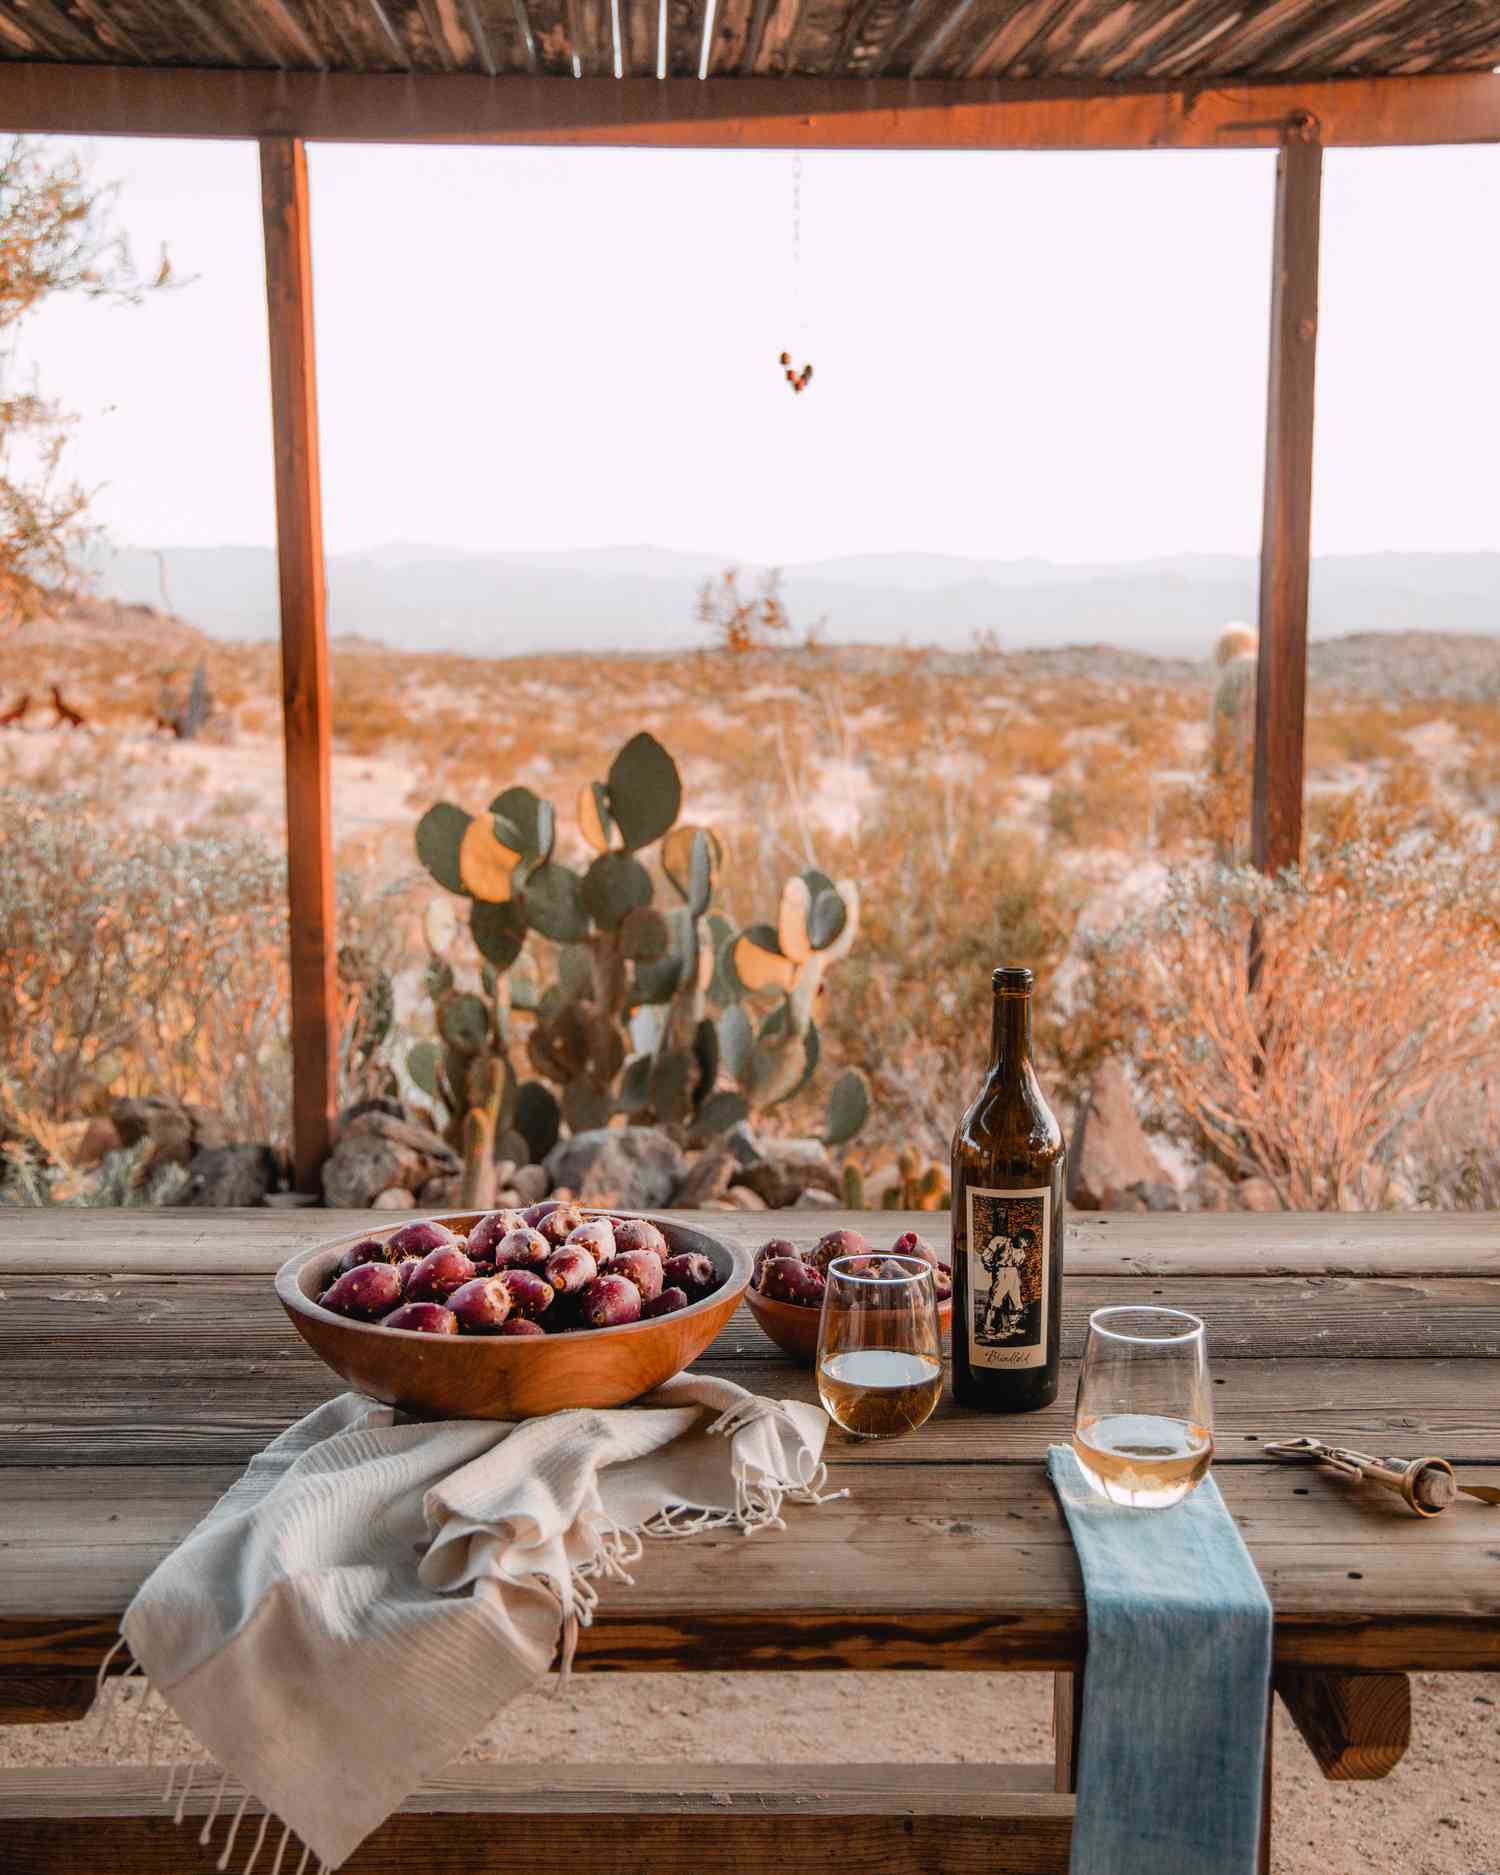 Outdoor dining at The Joshua Tree House